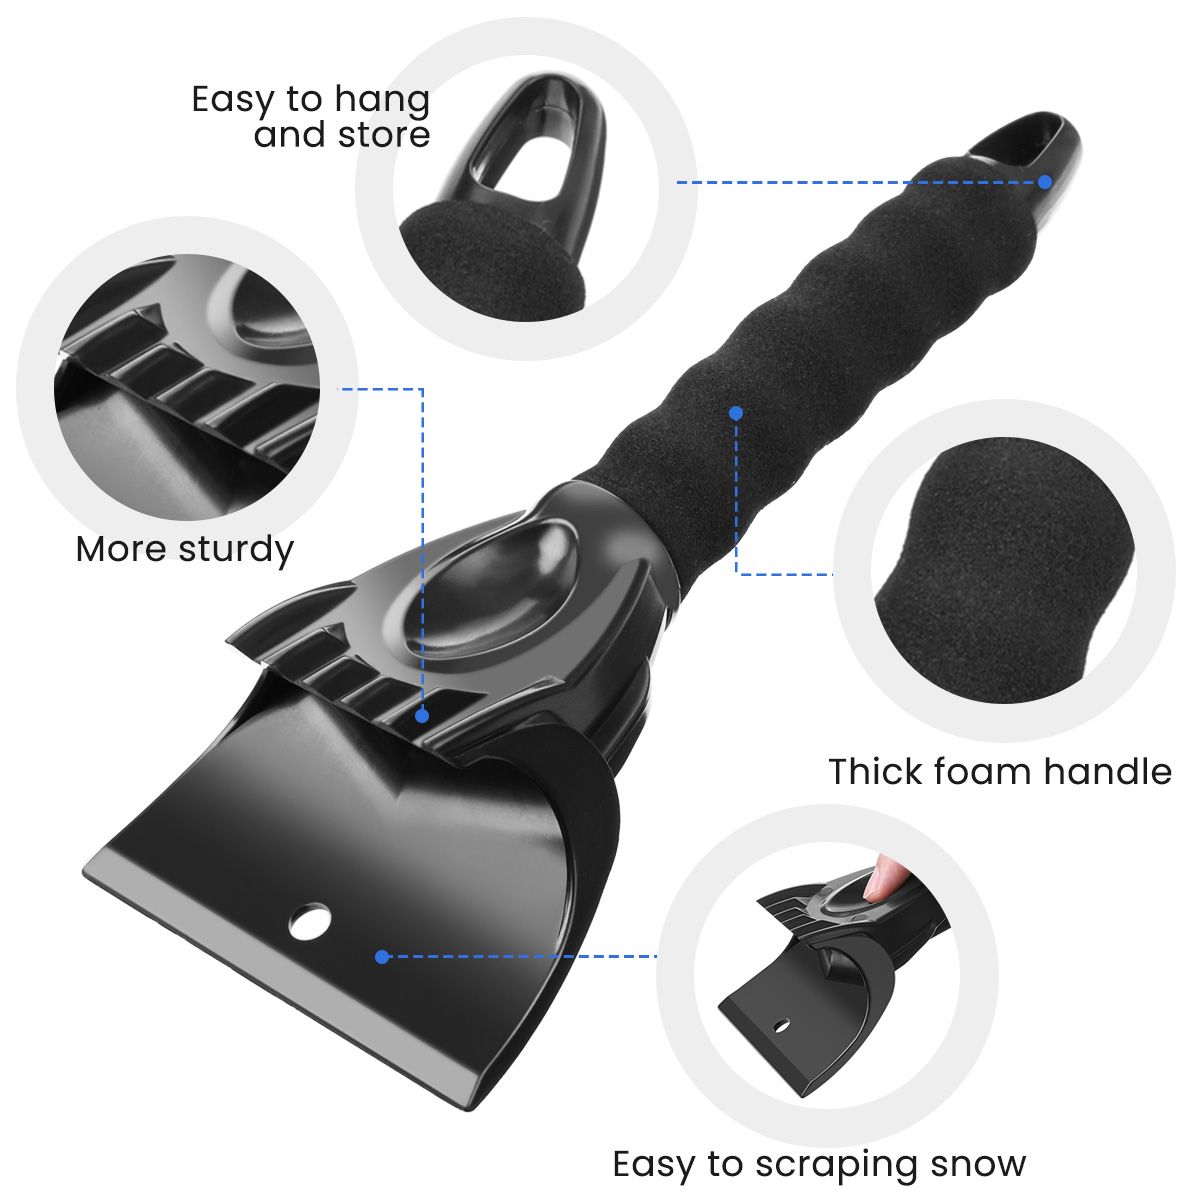 Ice-Scrapers-with-Separable-Glove-for-Car-Window-Winter-Ice-Shovel-Snow-Remover-1605486